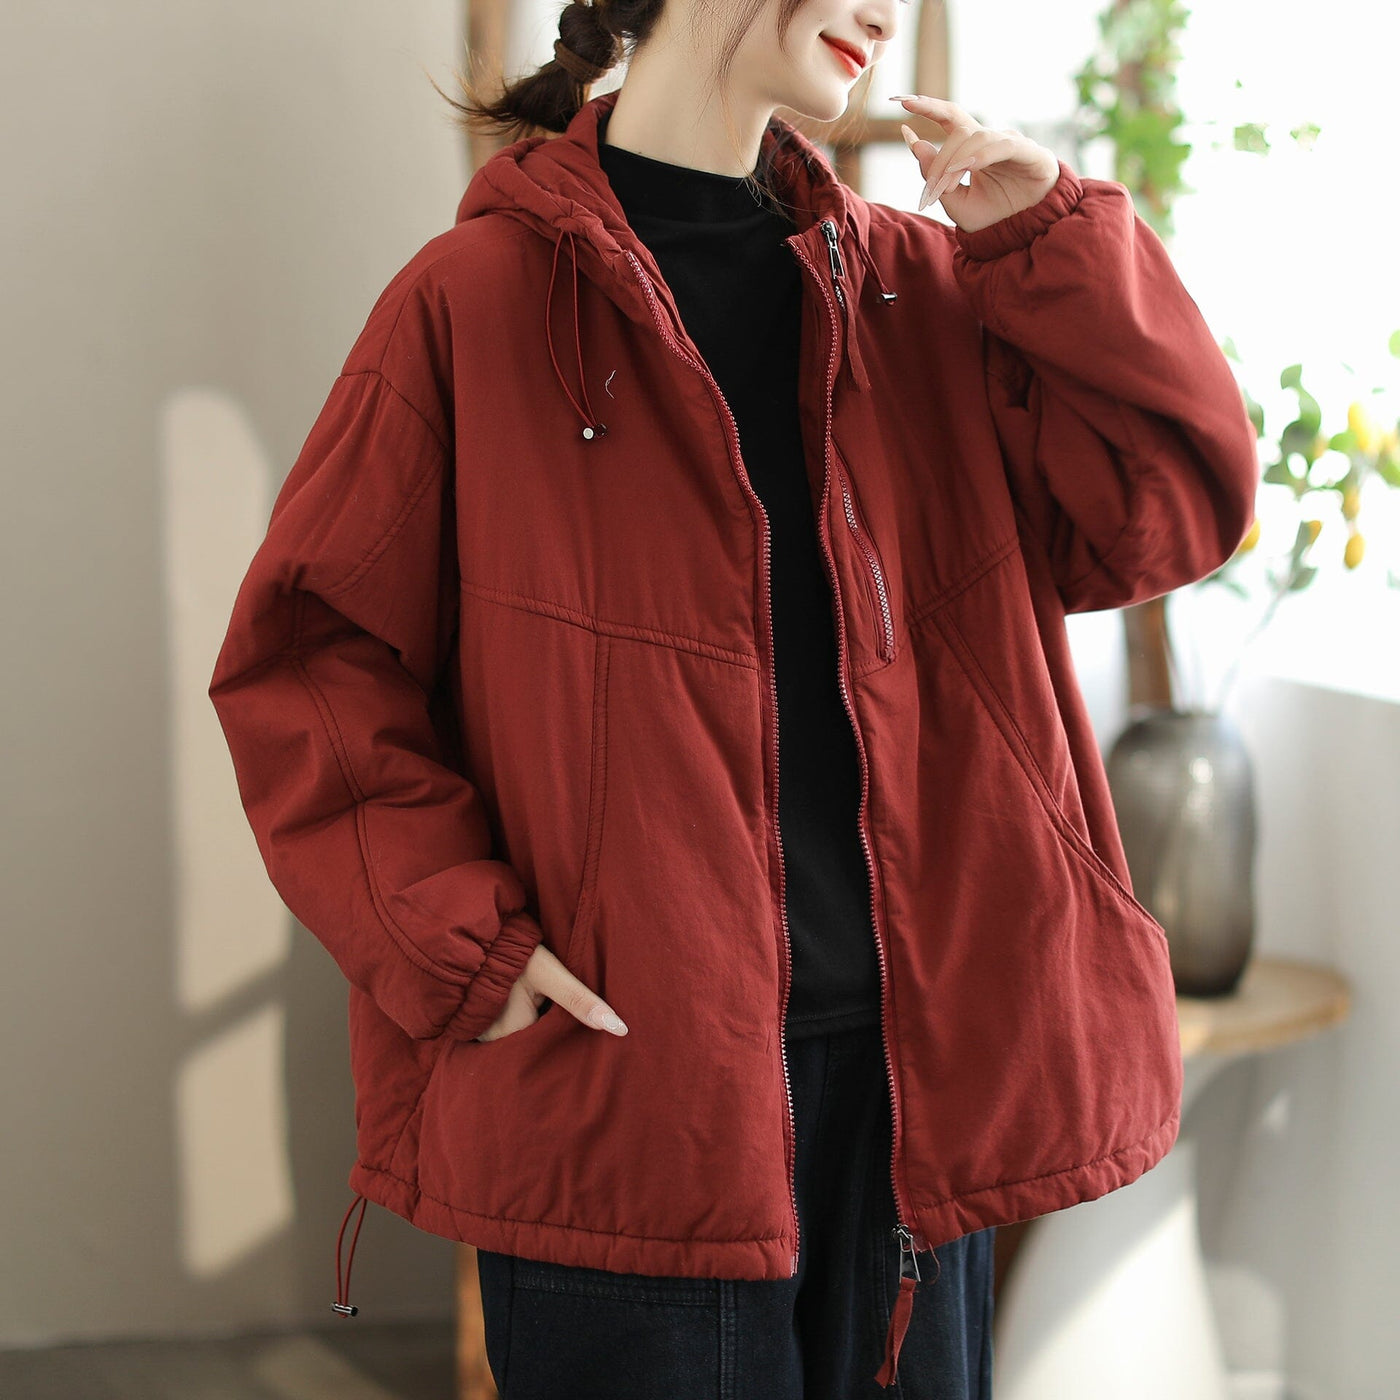 Women Fashion Loose Casual Solid Hooded Jacket